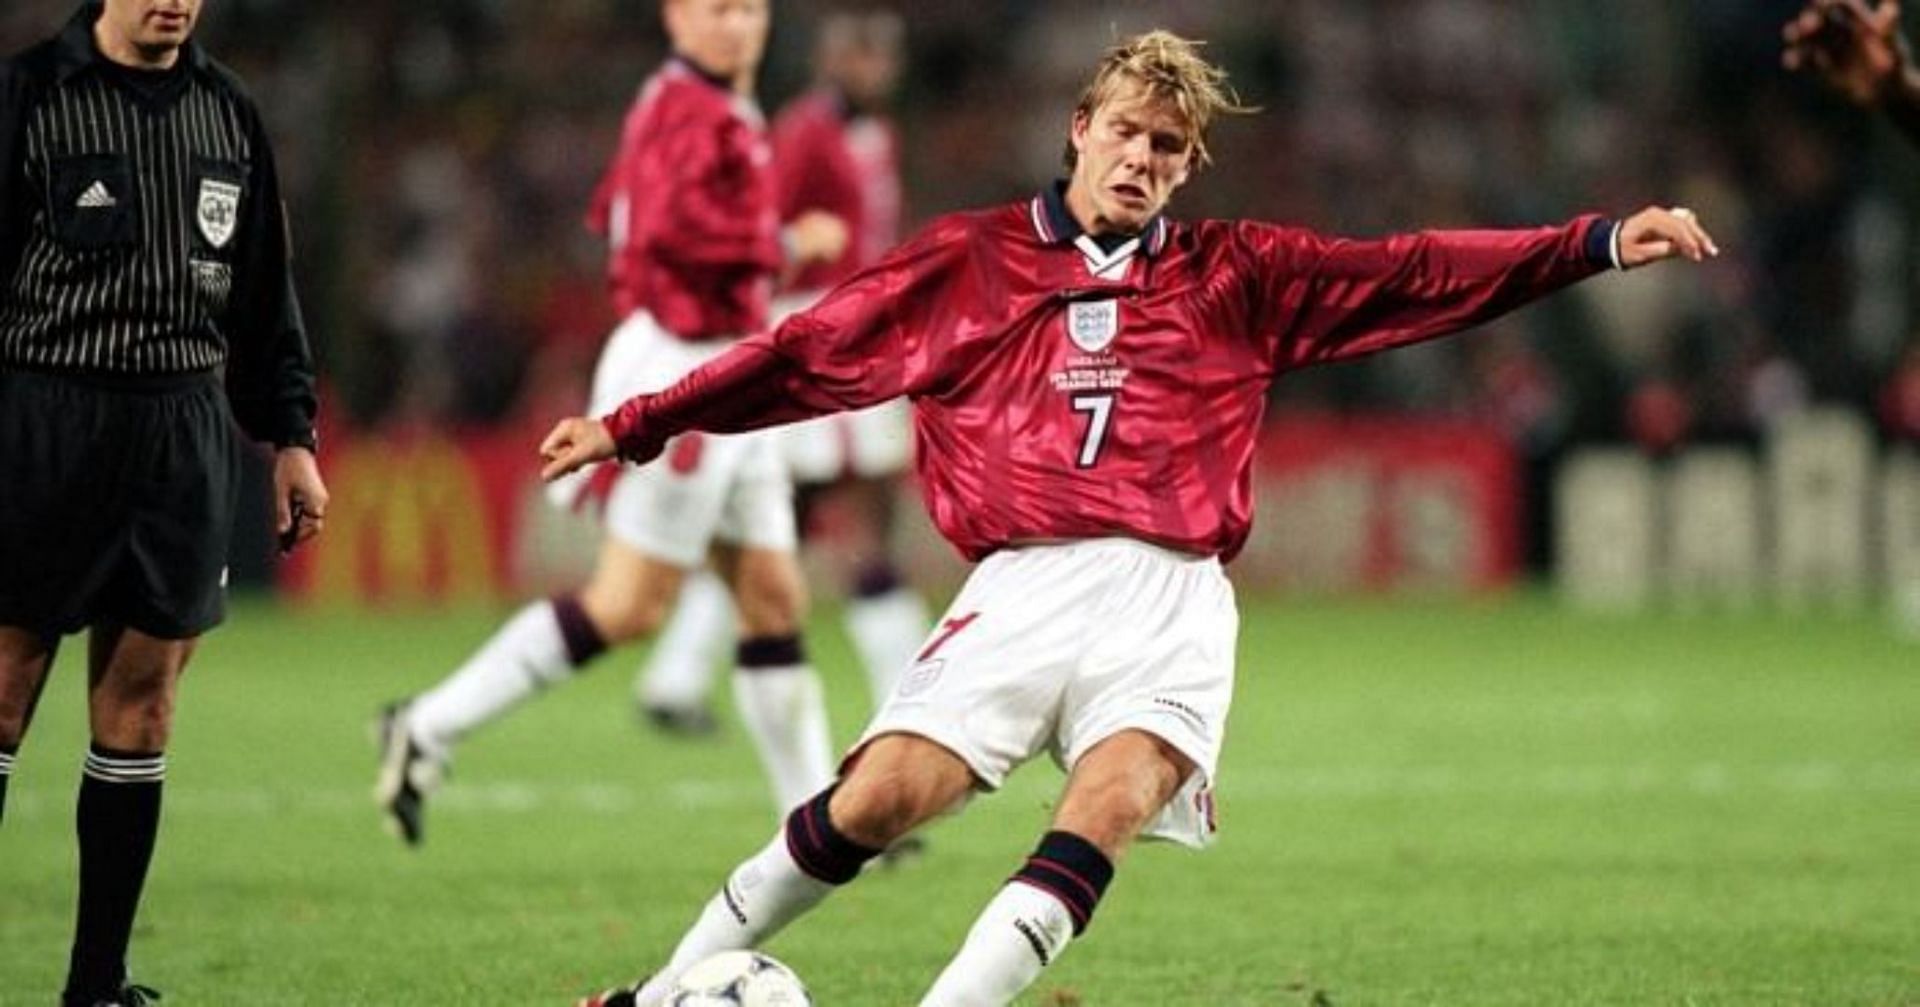 Beckham is one of the greatest free kick takers of all time.